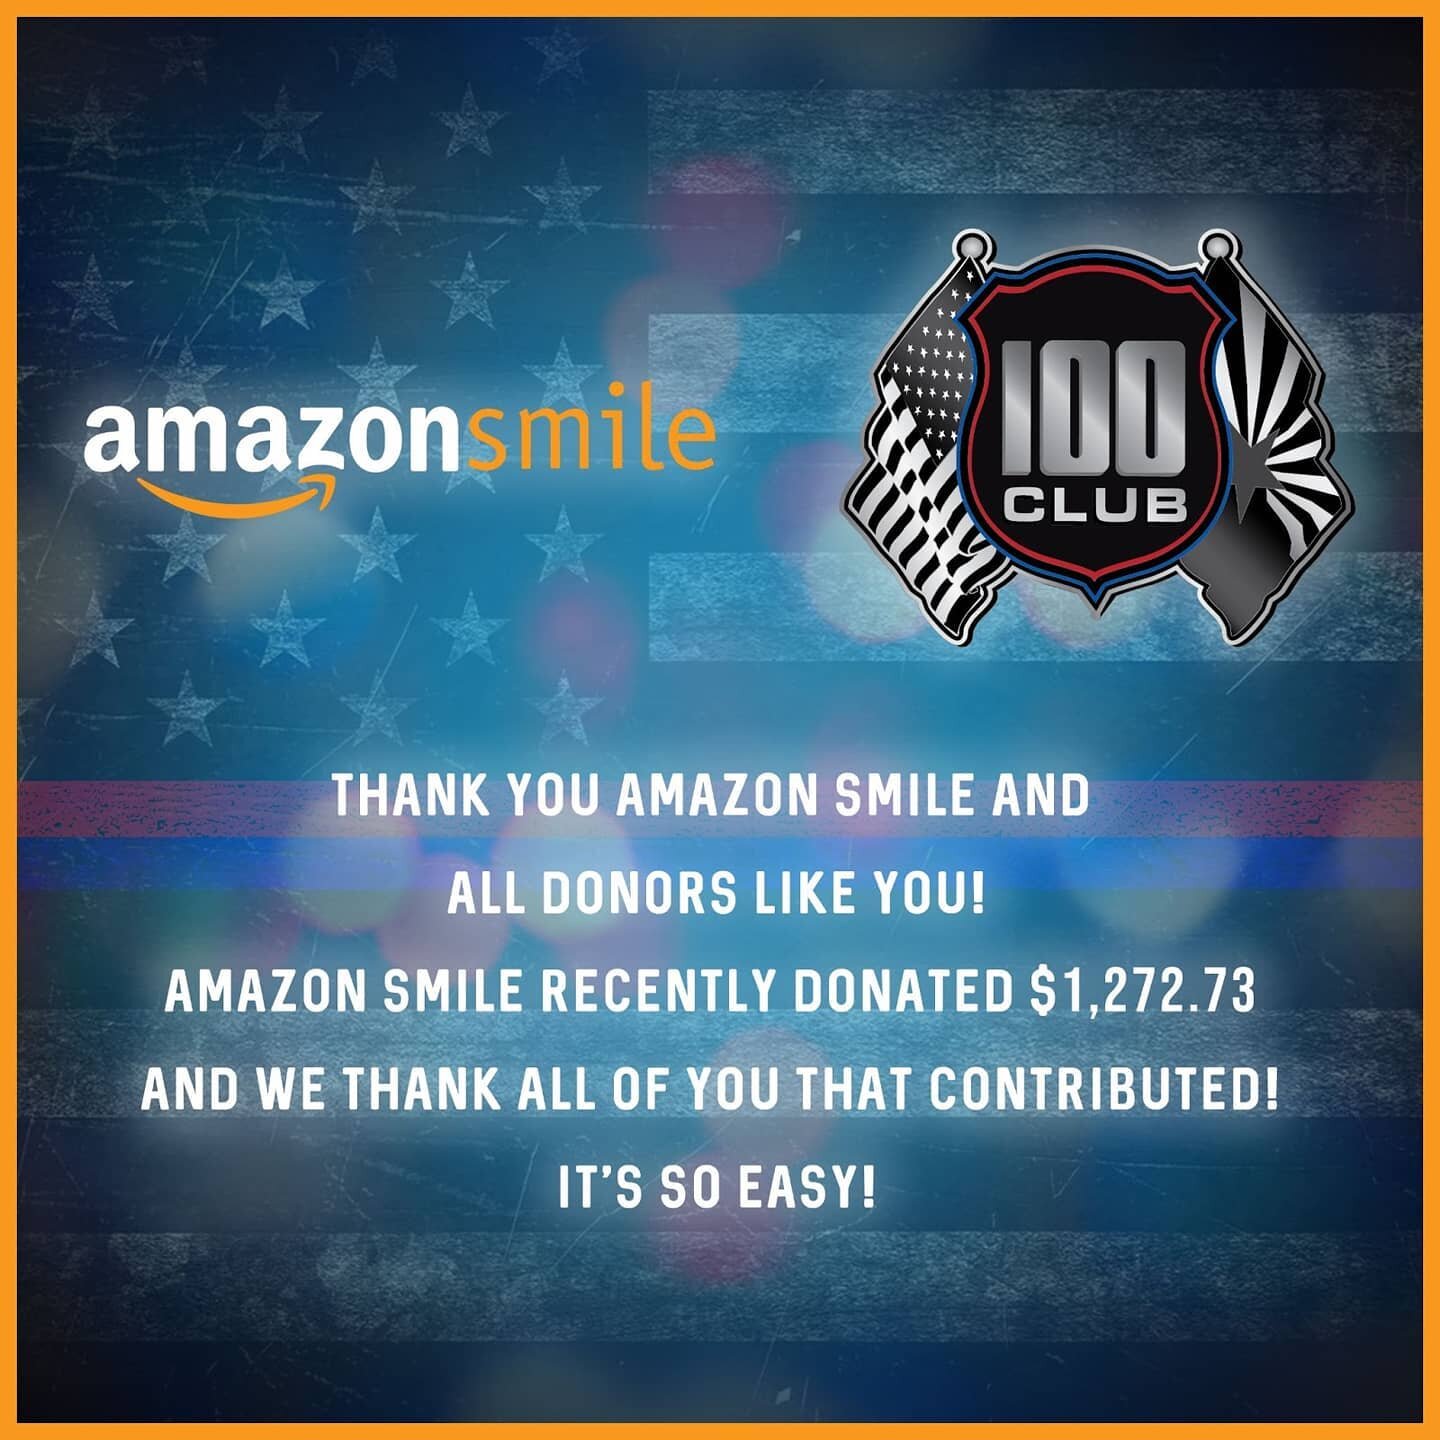 How incredible!! Thanks so much to AmazonSmile and all donors for recently donating $1,272.73 to the 100 Club of Arizona! Support from people like you shopping on Amazon Smile not only helps provide resources for public safety workers and their famil